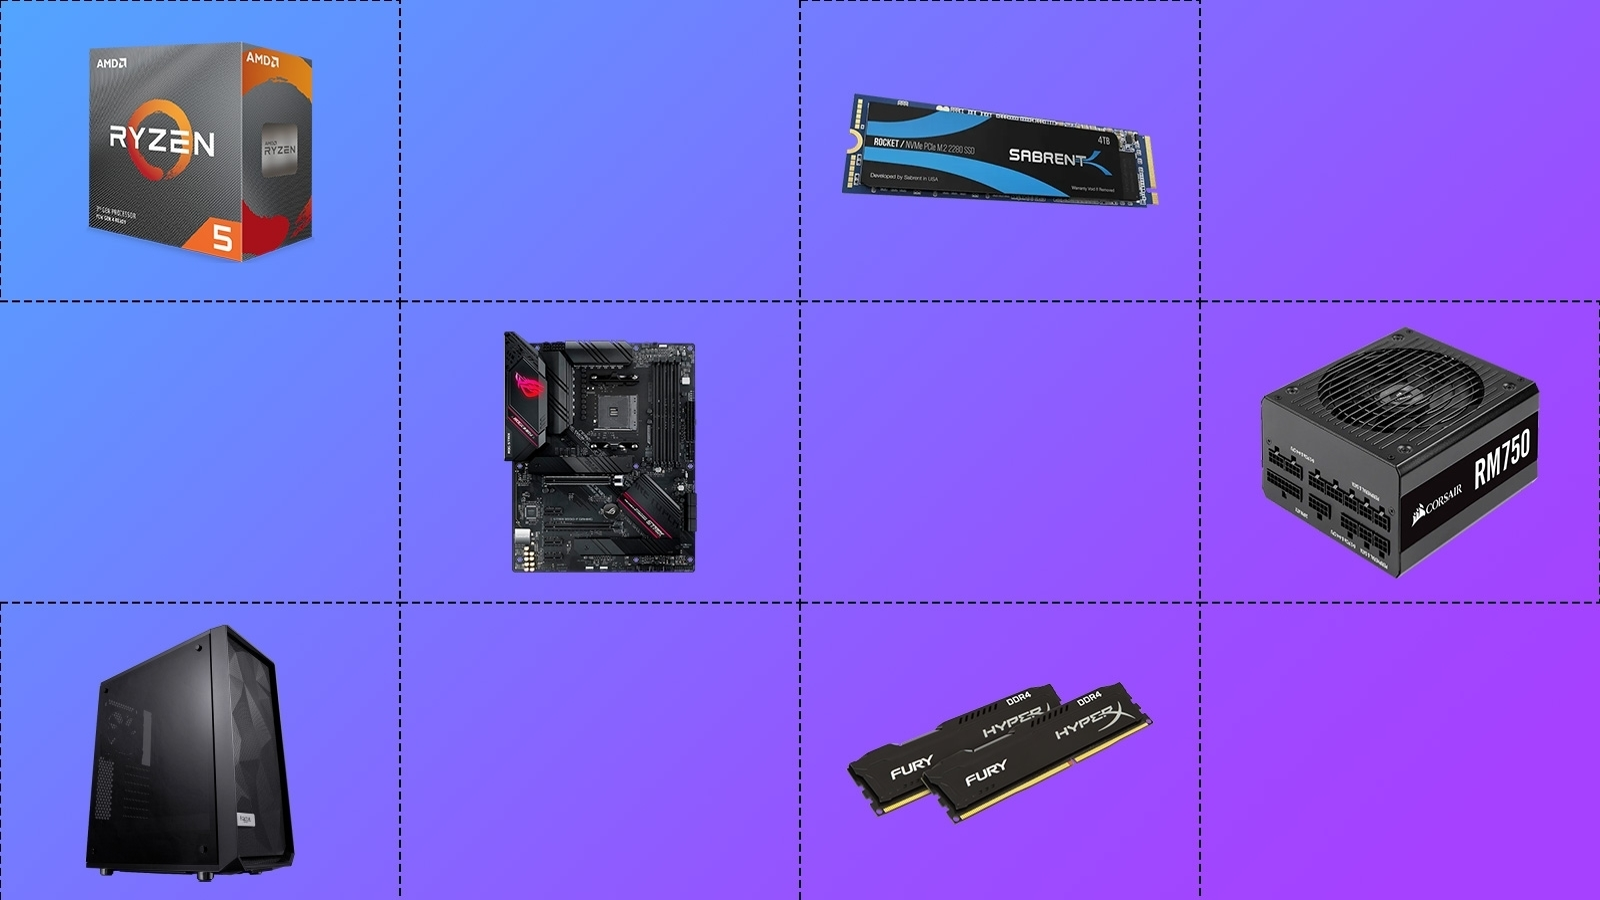 Does Anybody know all about my gaming PC parts? And were to find them so I  can upgrade my ram, and storage. Also can I attach more motherboard parts  on the motherboard?